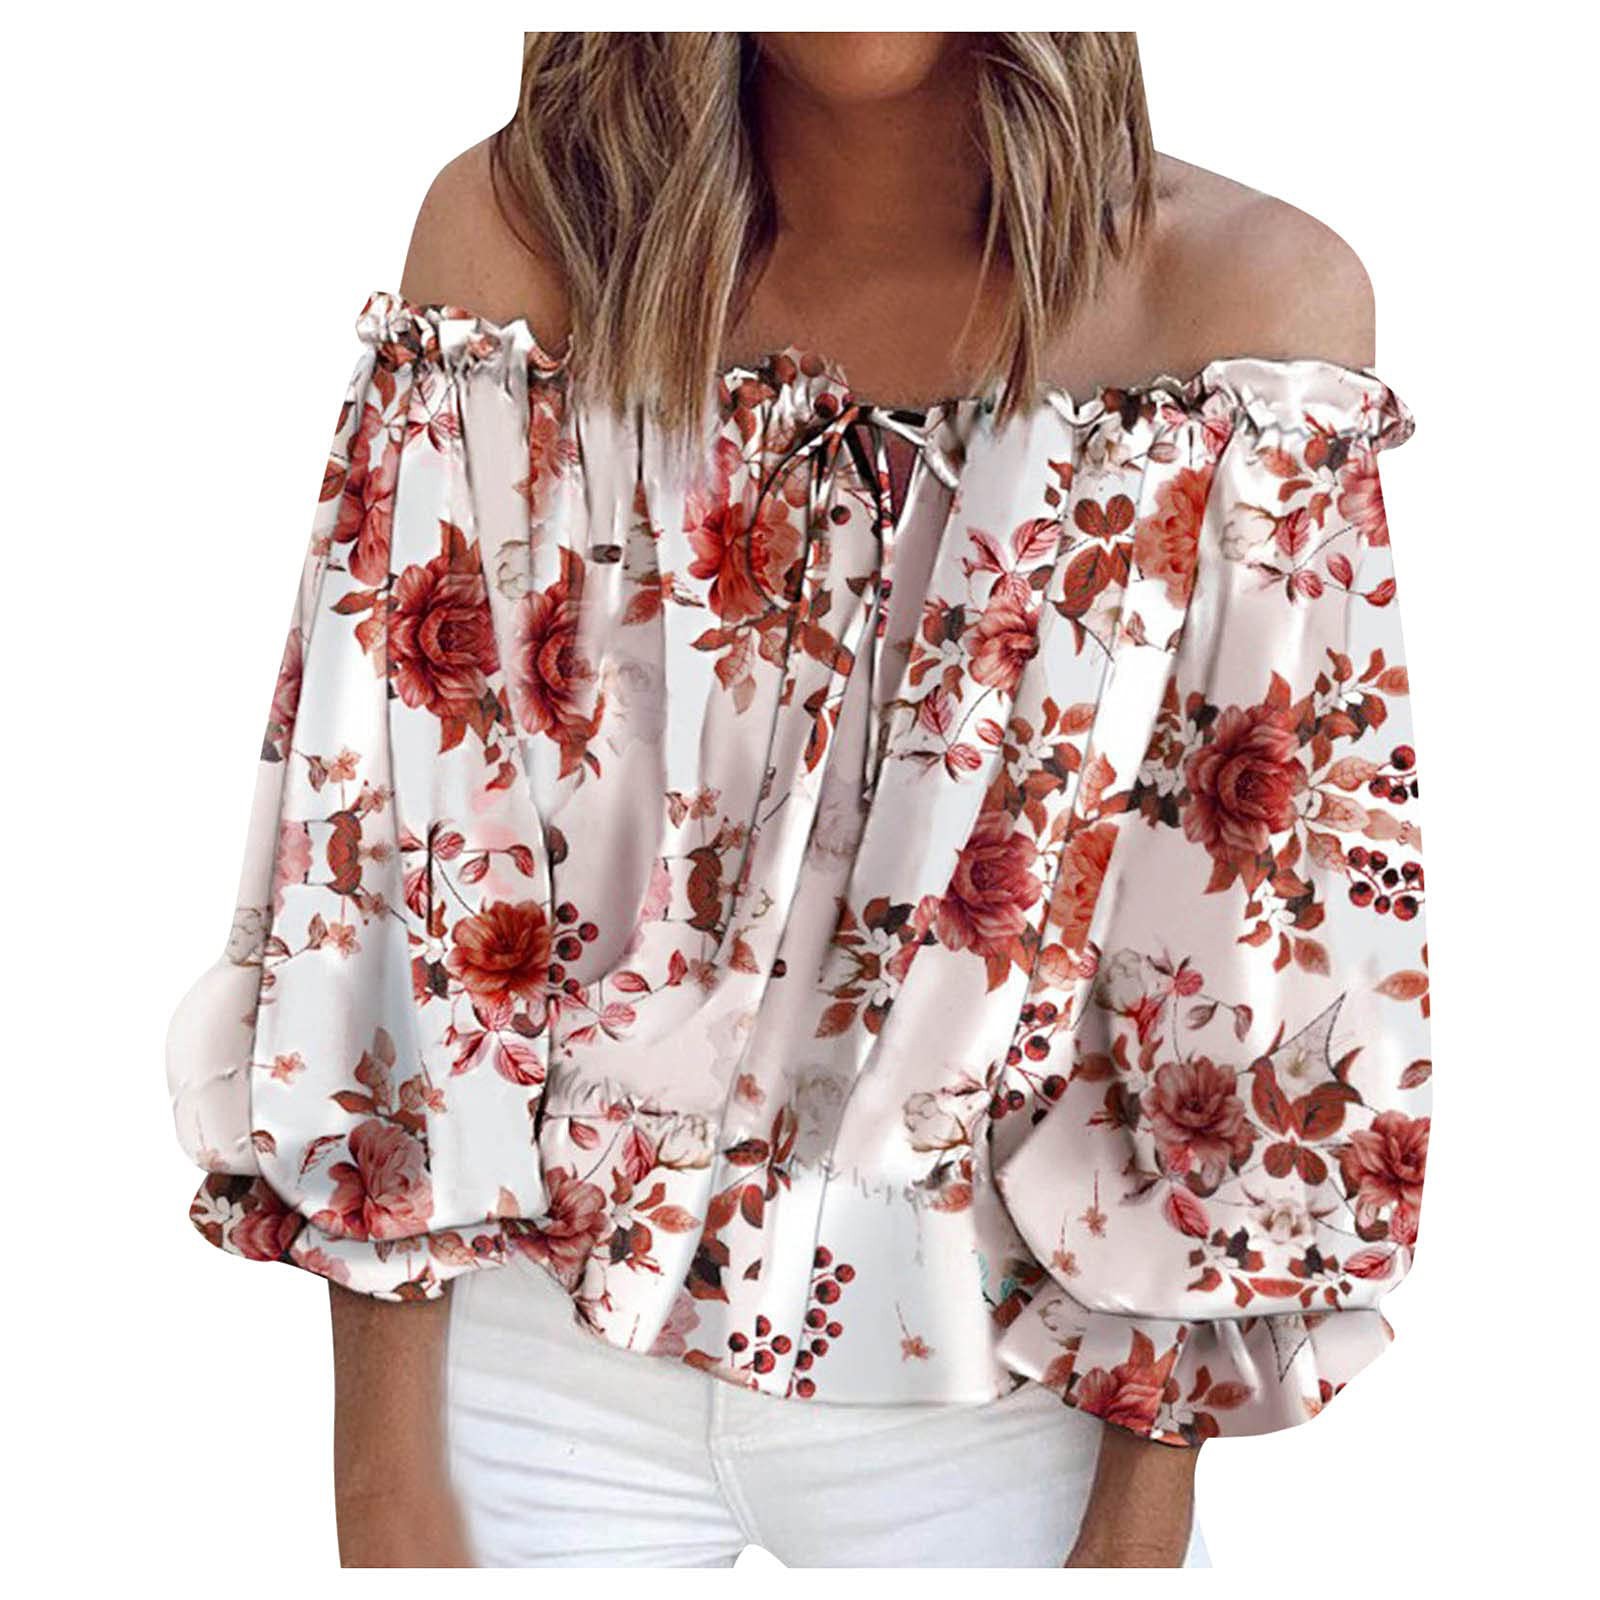 ZQGJB Off the Shoulder Tops for Women Elegant Chiffon Blouse Trendy ...